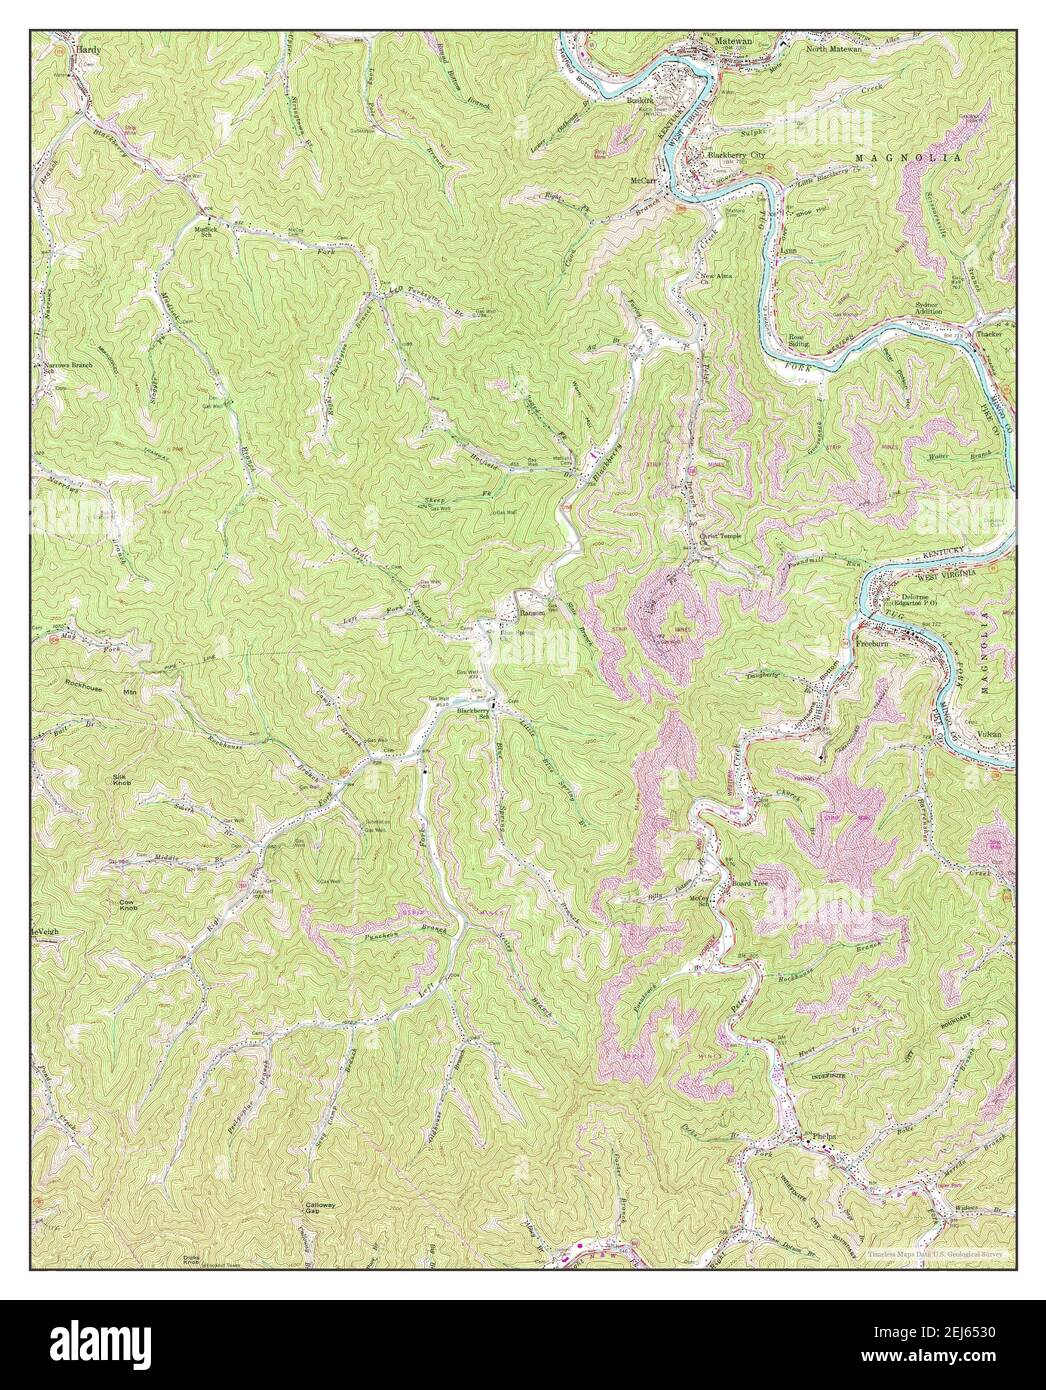 Matewan, West Virginia, map 1954, 1:24000, United States of America by Timeless Maps, data U.S. Geological Survey Stock Photo